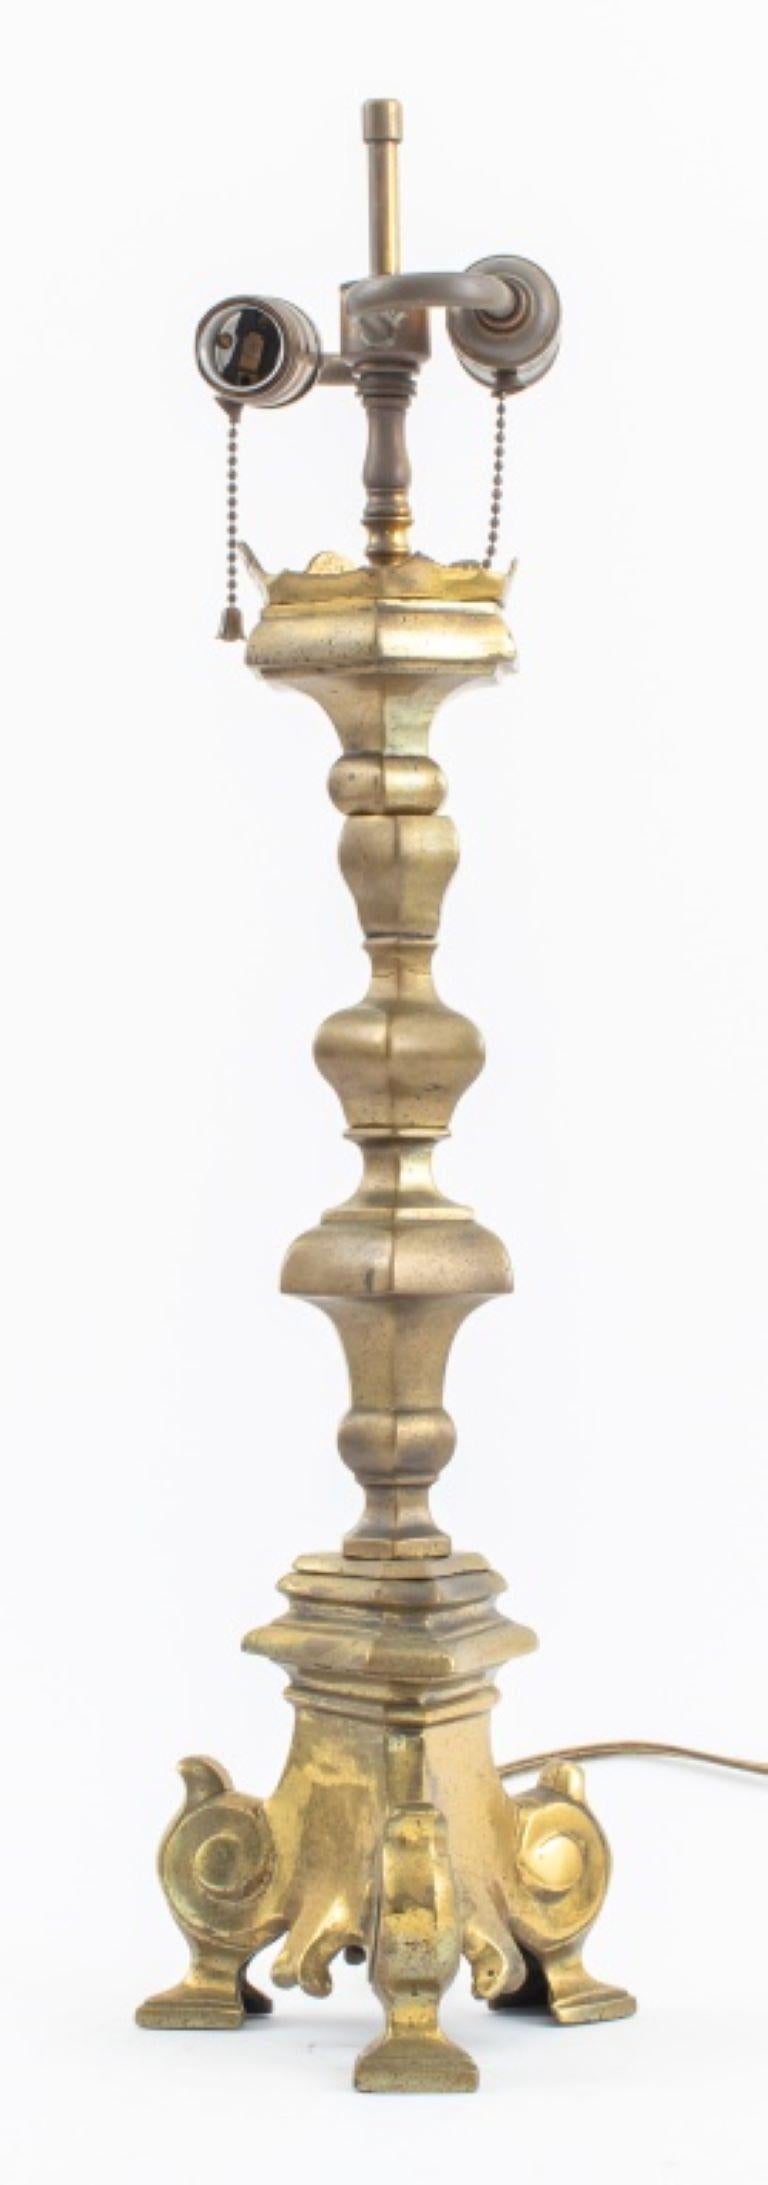 Polished brass church candle stick with triangular base and three legs mounted as a lamp.

Dealer: S138XX